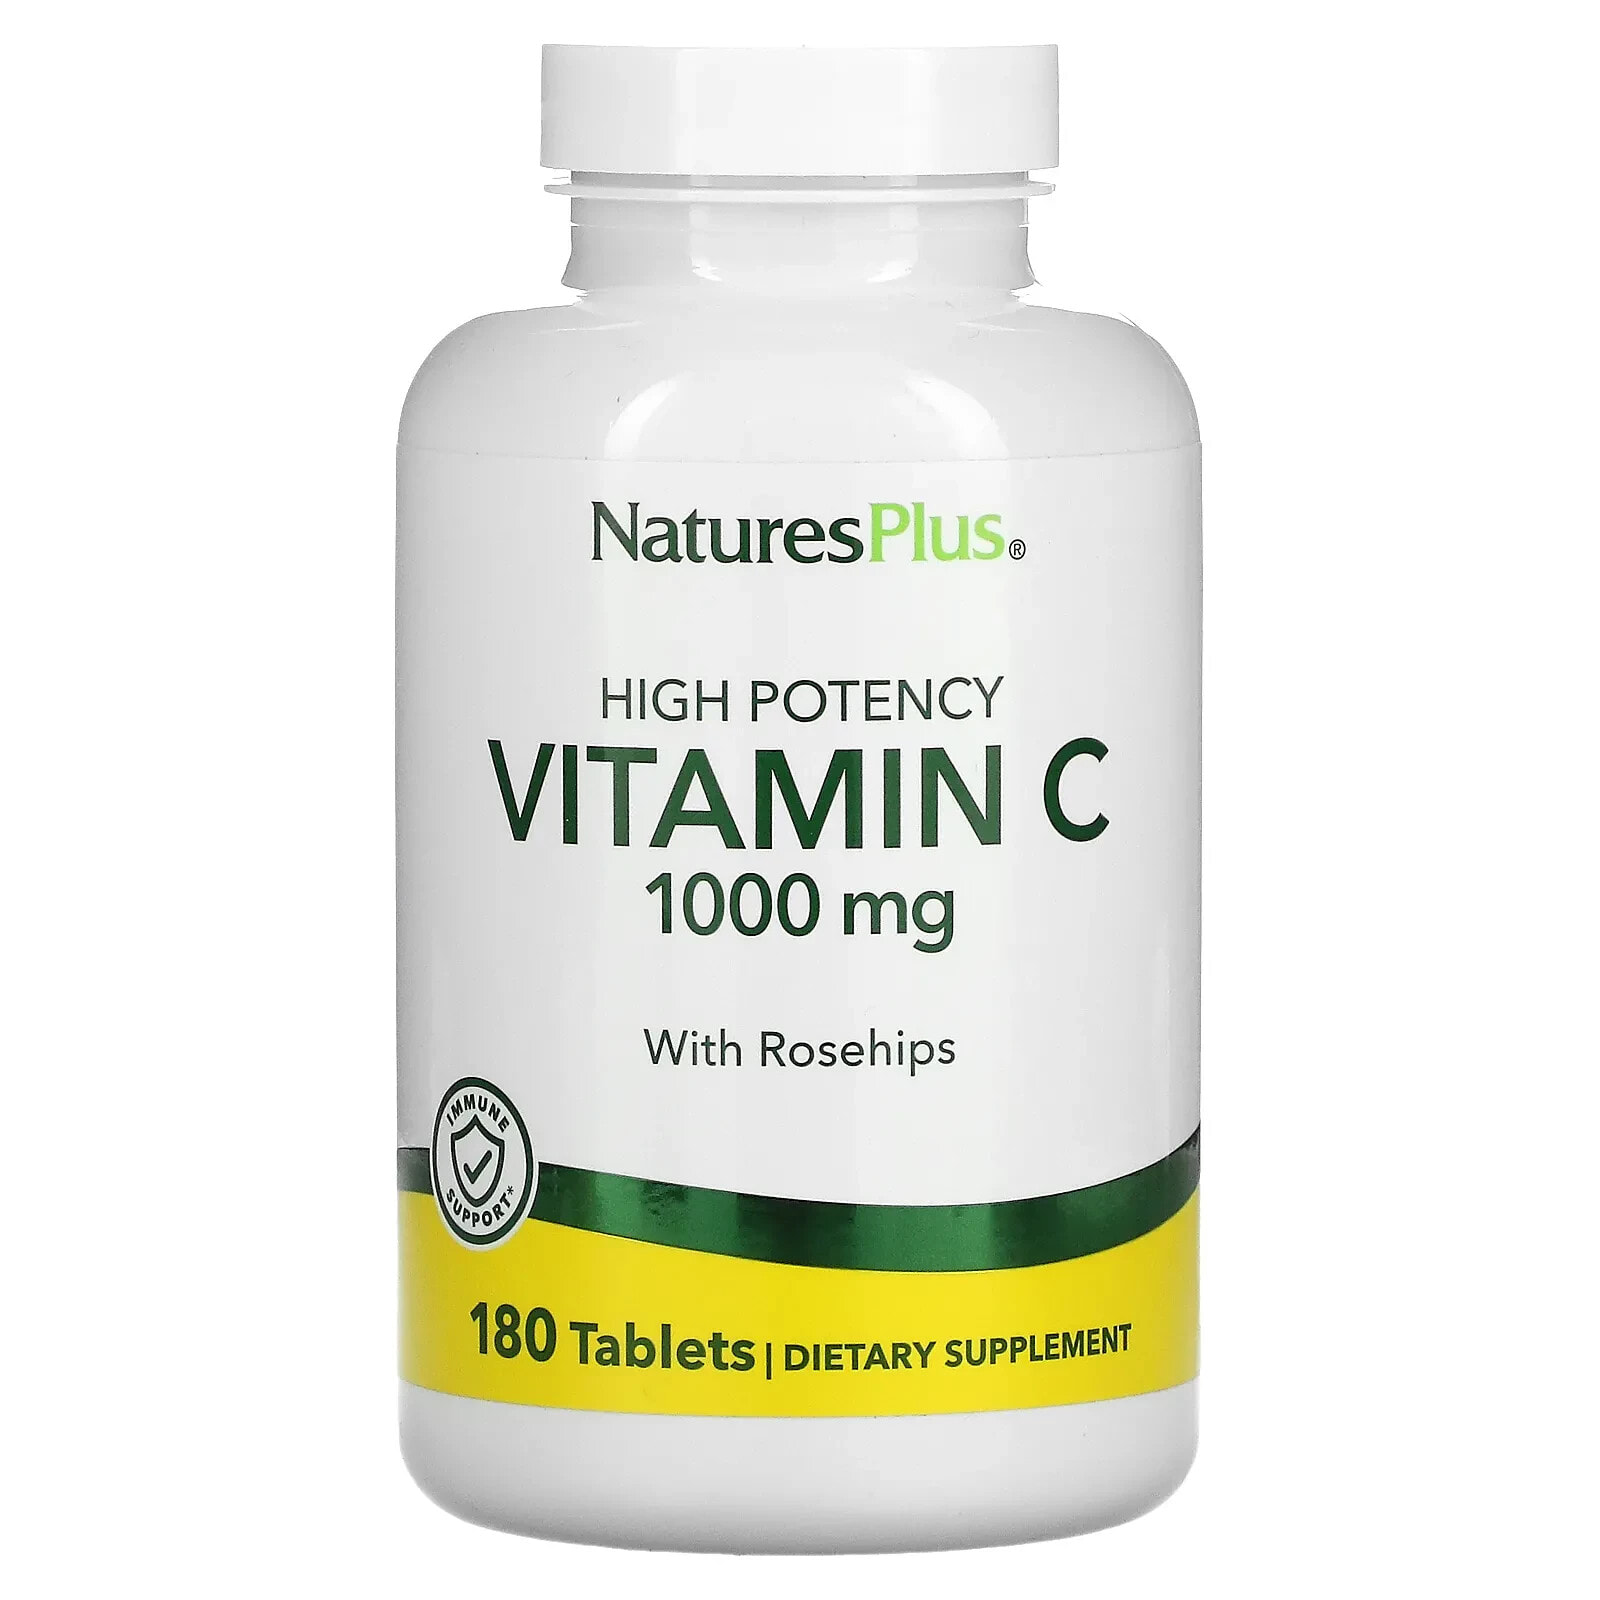 NaturesPlus, High Potency Vitamin C With Rosehips , 1,000 mg, 180 Tablets